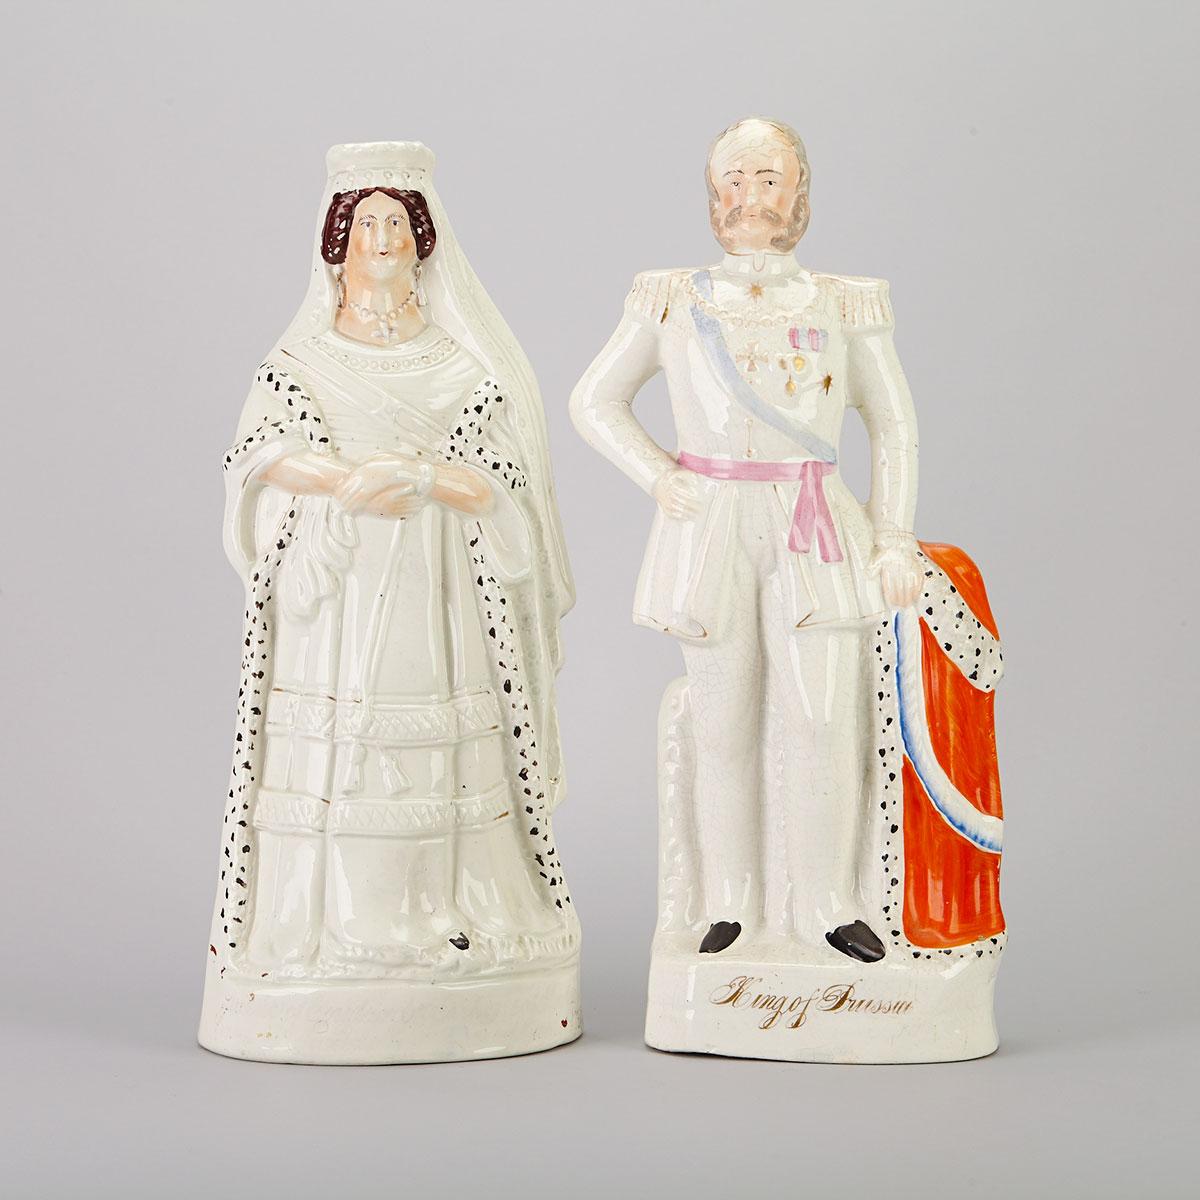 Staffordshire Figures of Queen Victoria and King of Prussia, 19th century